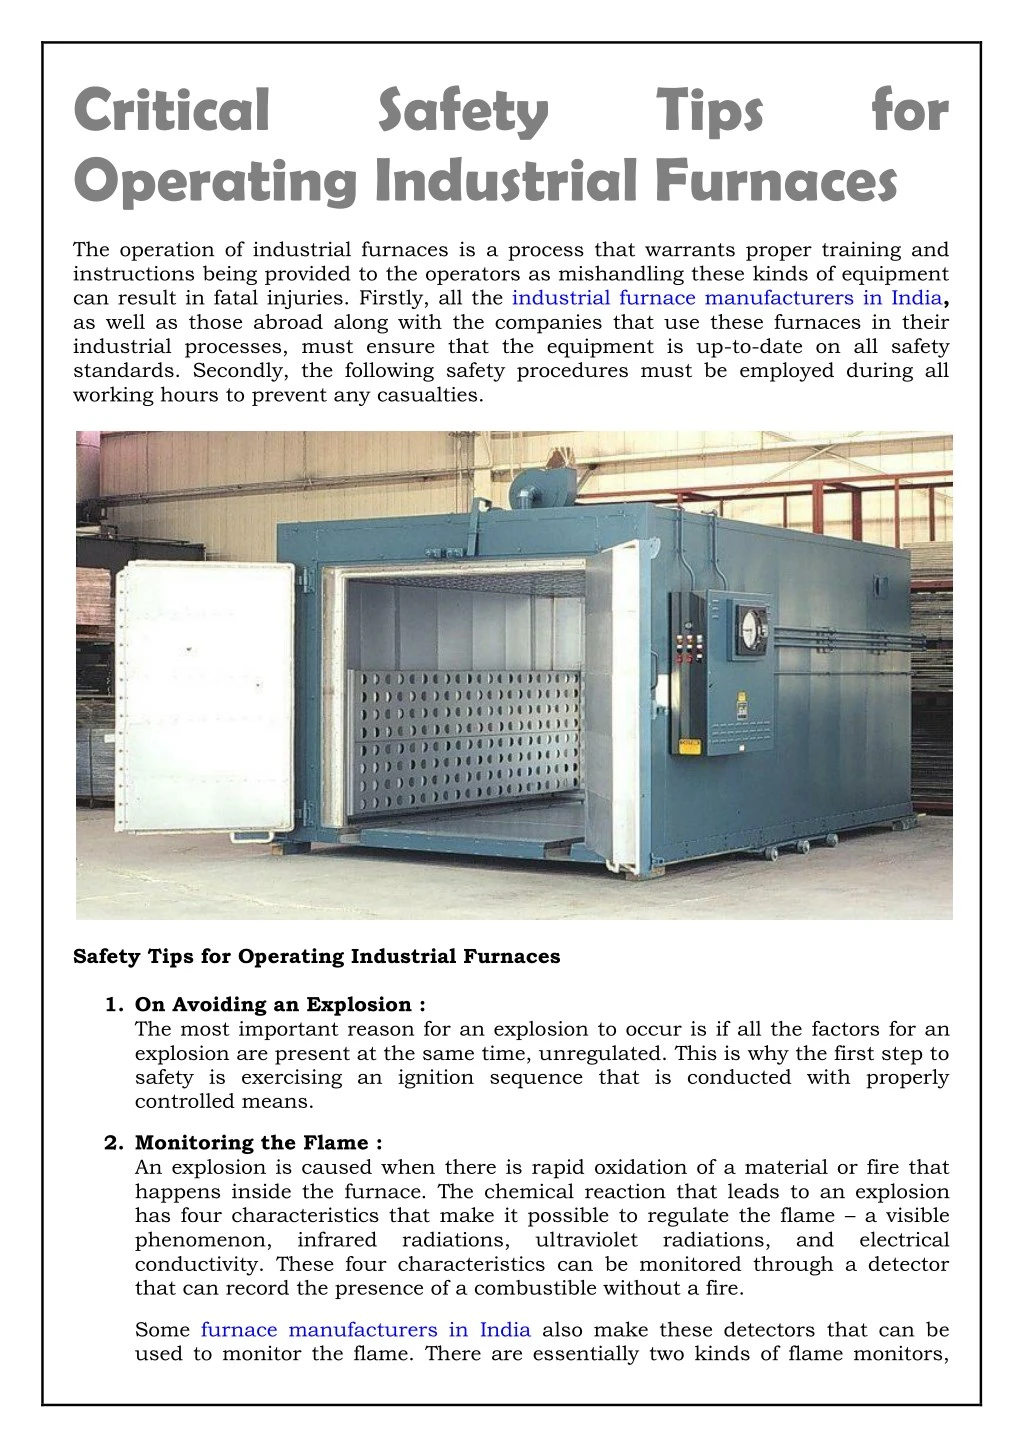 critical operating industrial furnaces